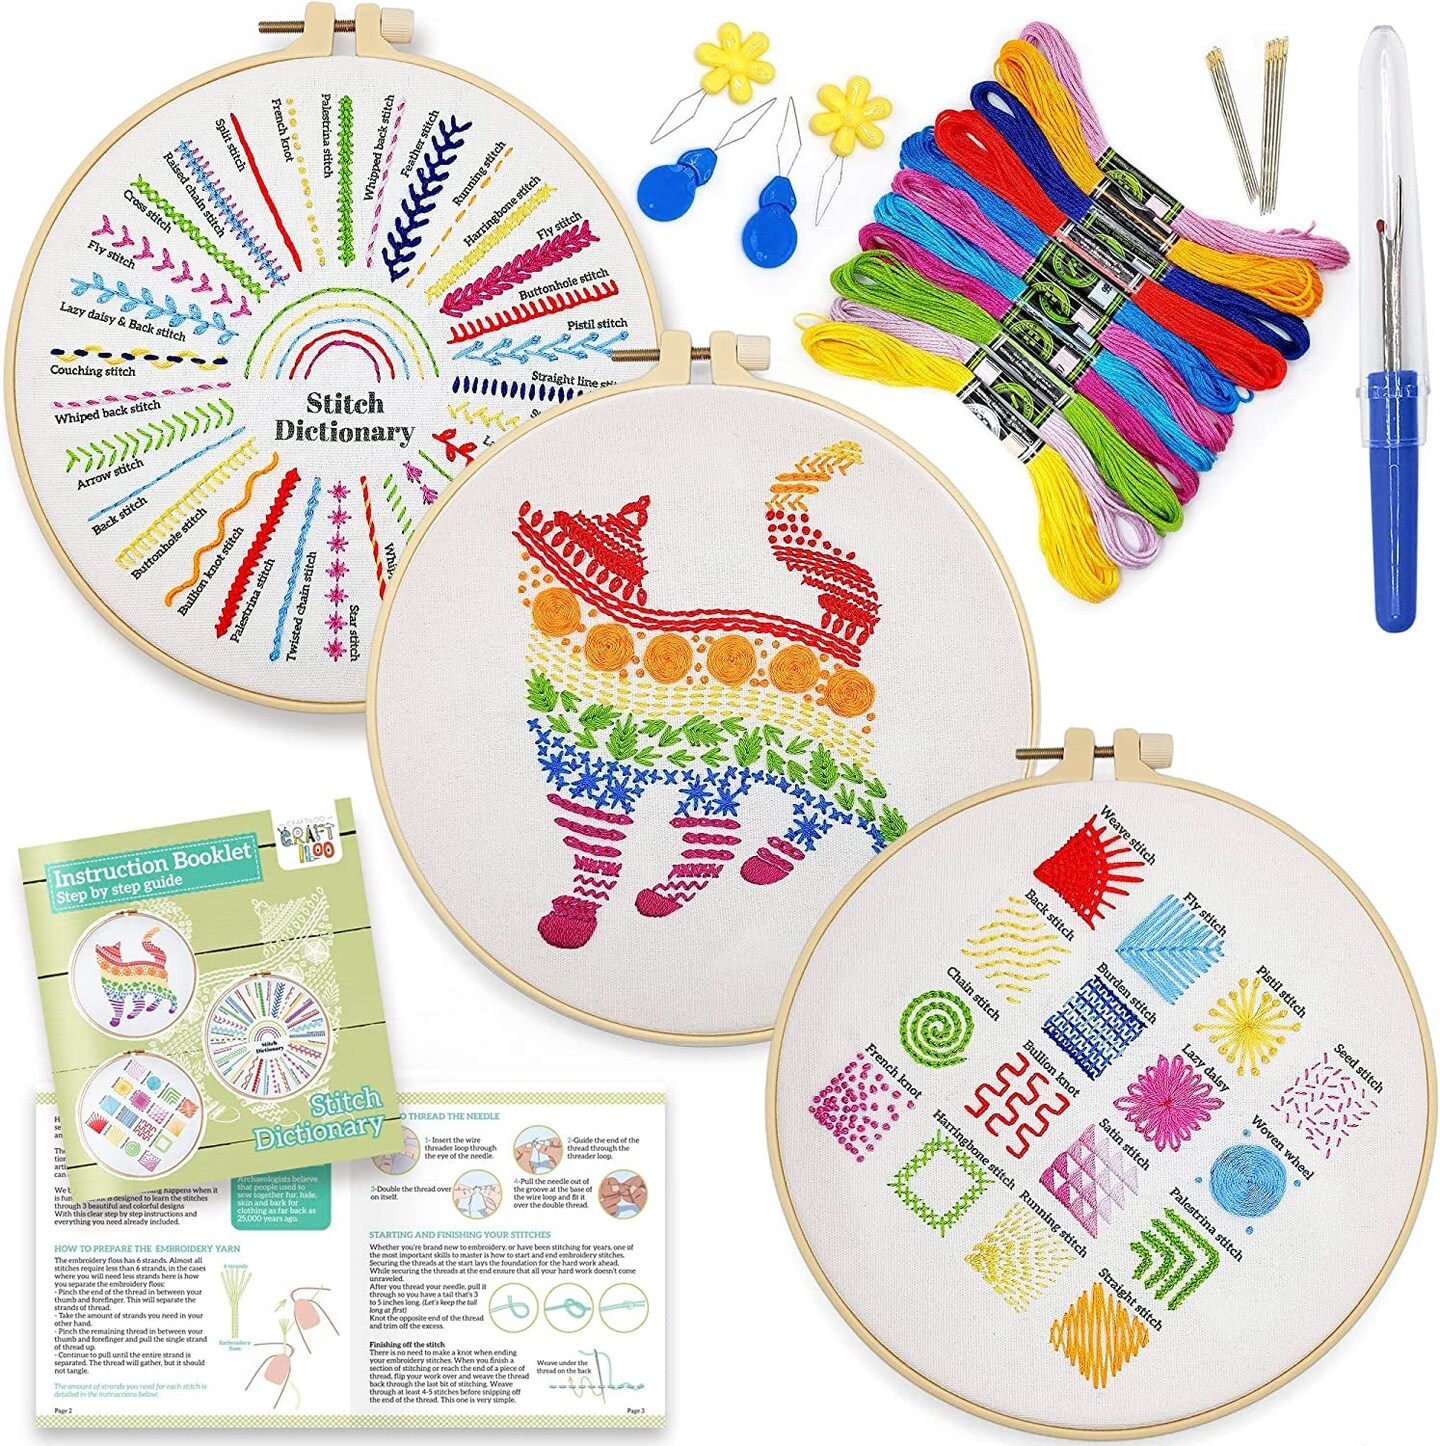 Embroidery Kit for Beginners, Kits for Adults Include 3 Embroidery